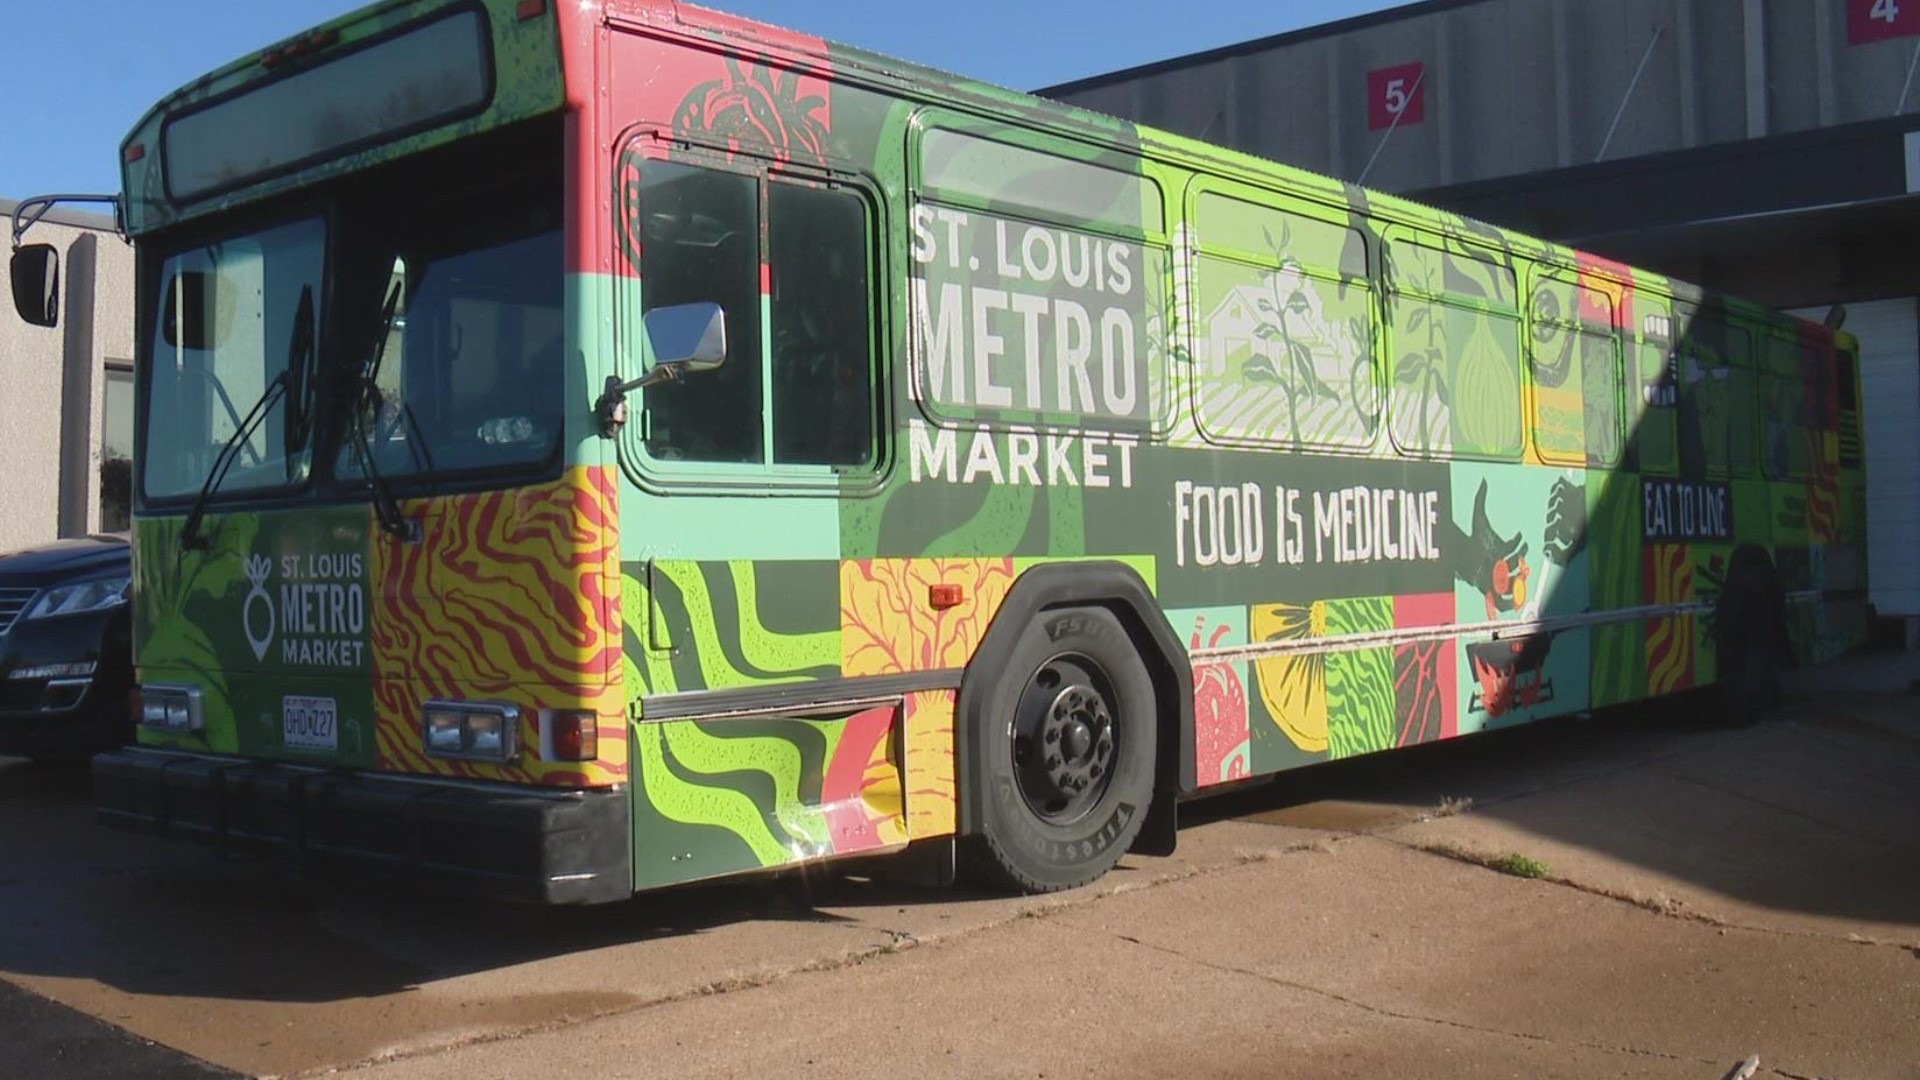 There is an ongoing problem in St. Louis – people not being able to buy fresh food. But there’s an effort to bring proper nutrition to food deserts.